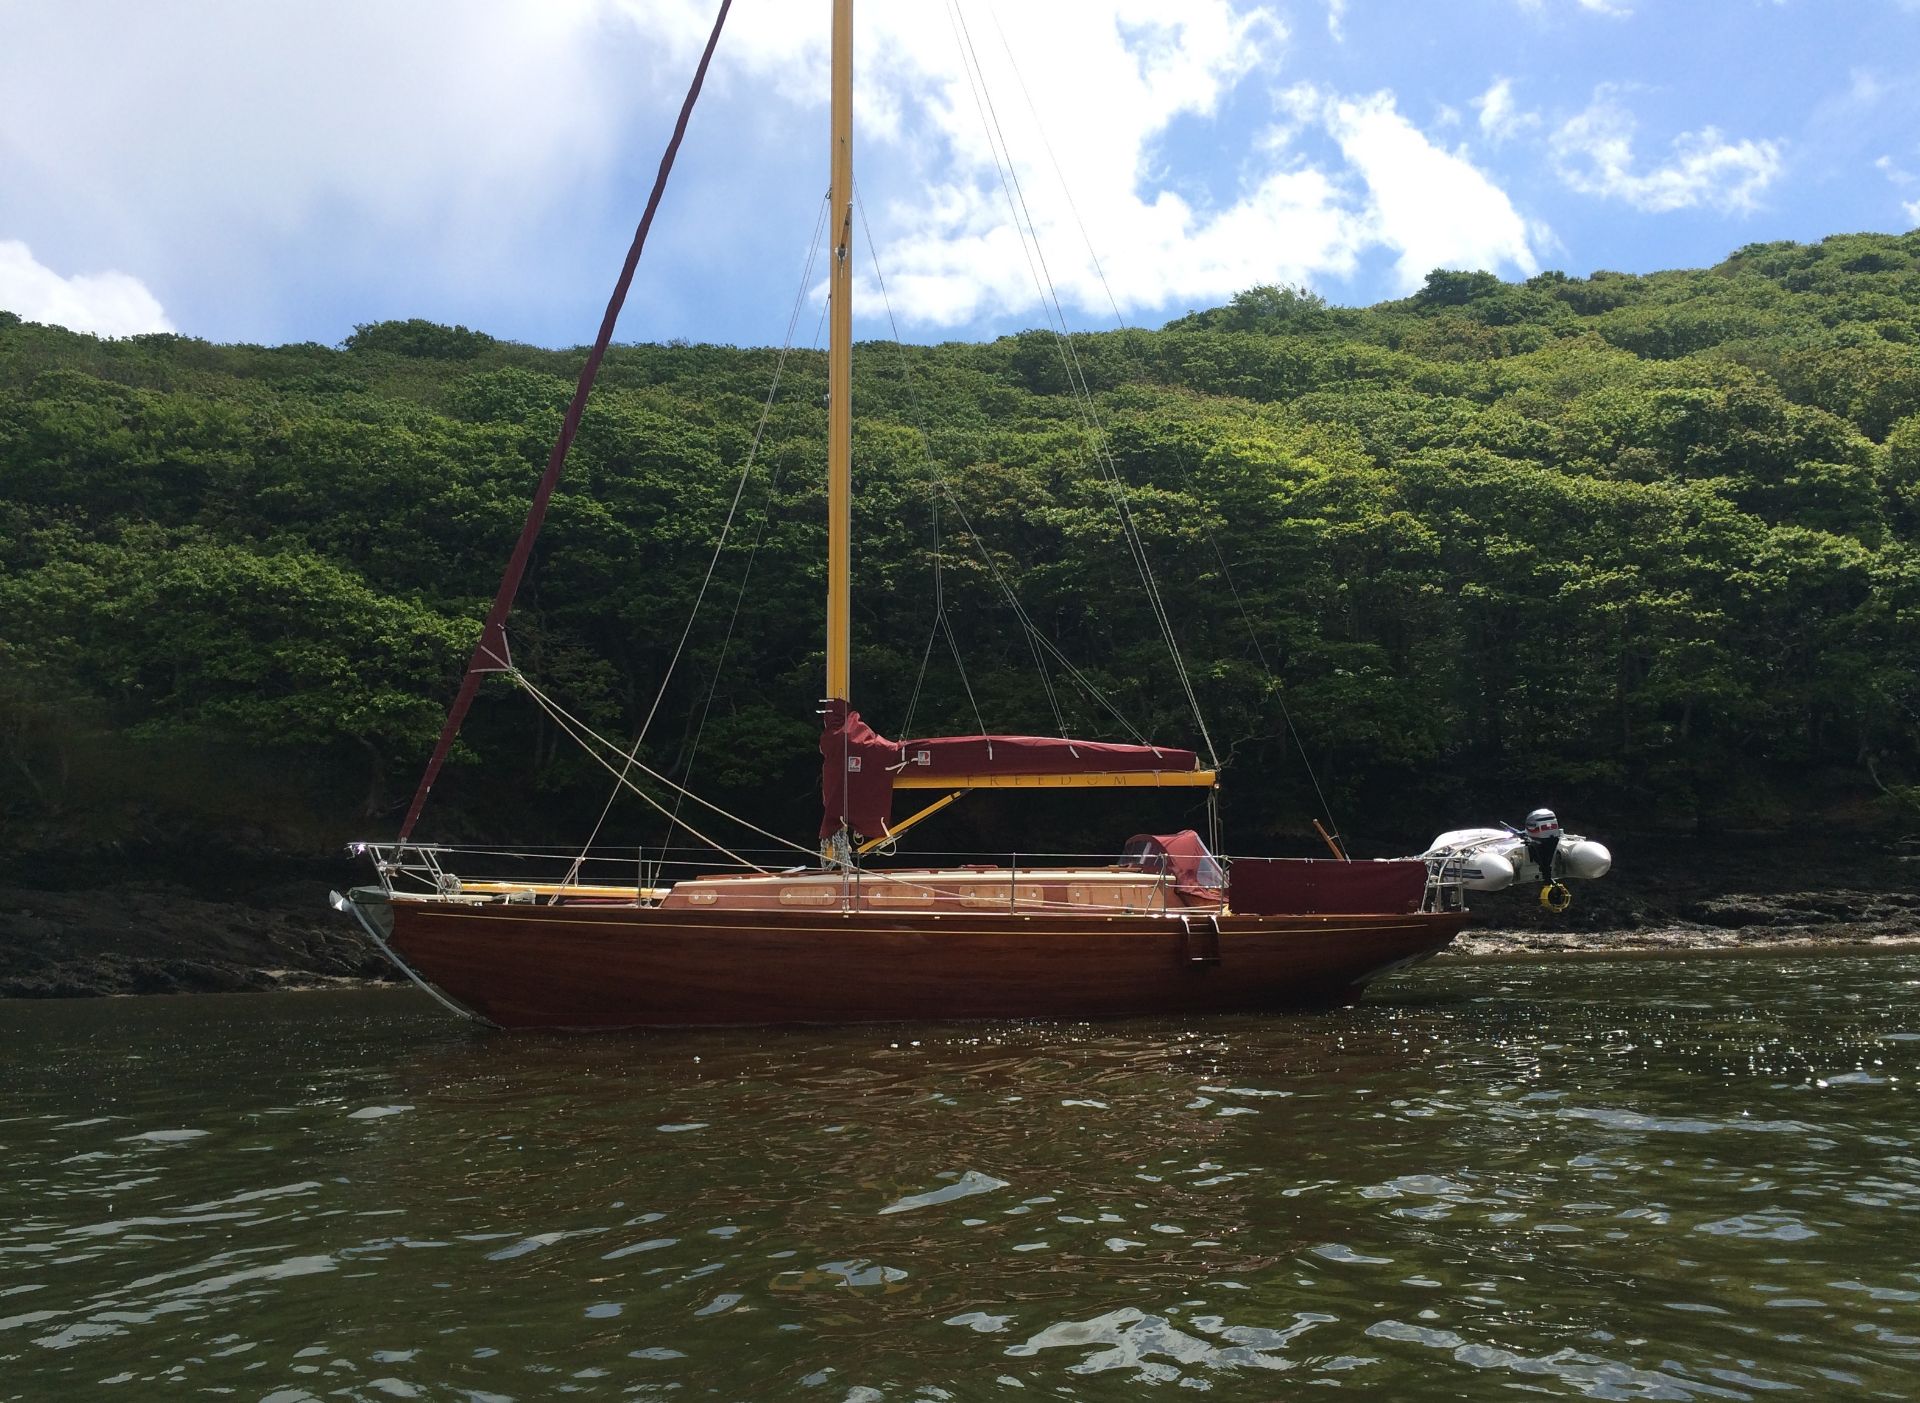 McGruer Wooden Classic 38' Conditioned Sailing Yacht. A McGruer Wooden Classic 38' Sailing Yacht. - Image 3 of 12